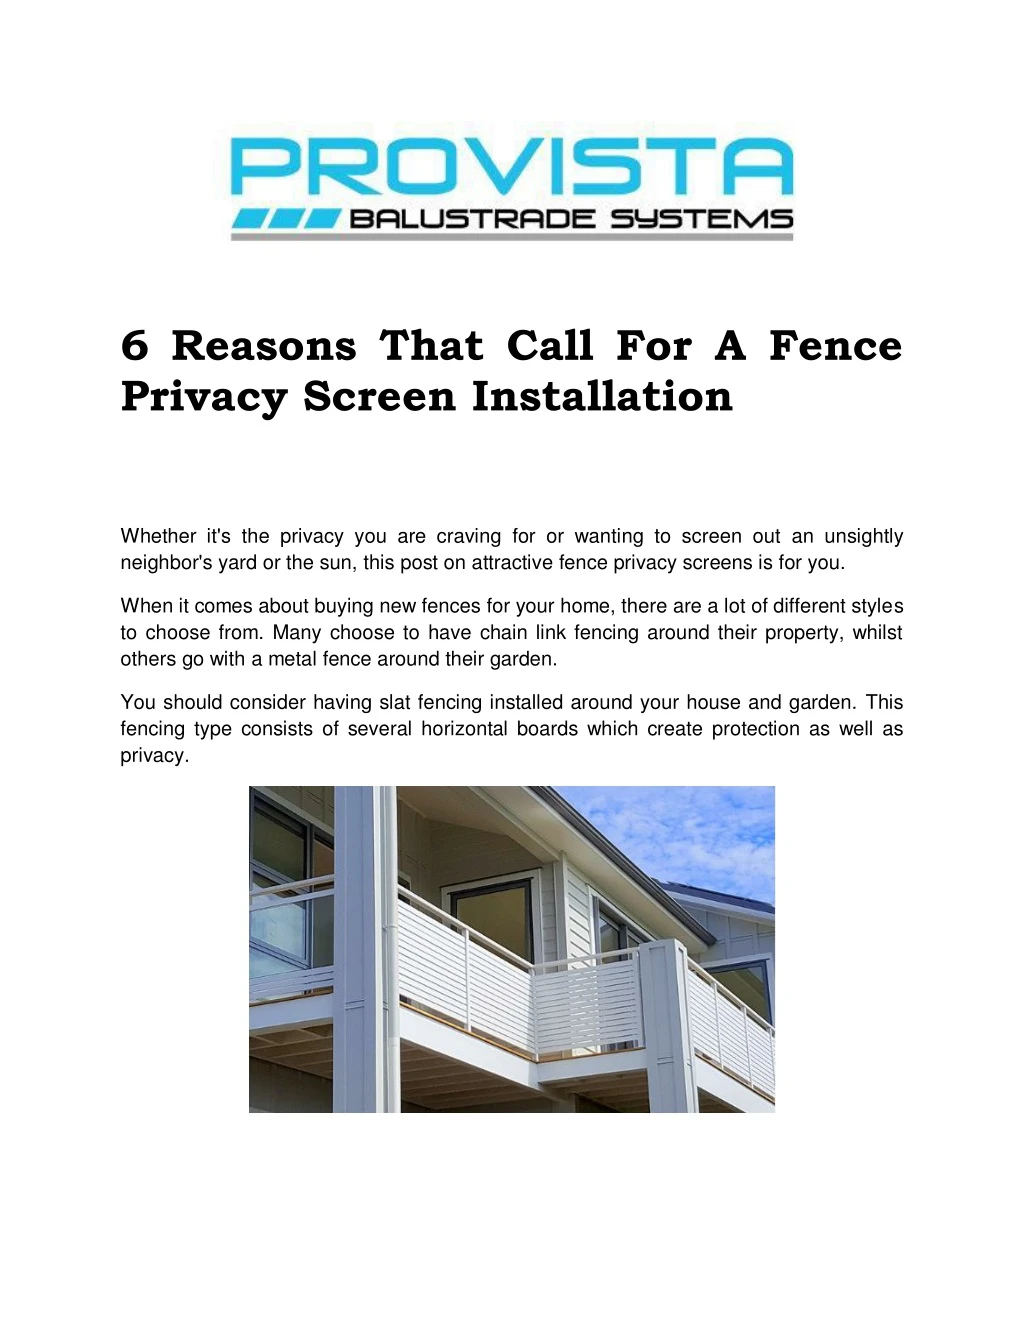 6 reasons that call for a fence privacy screen